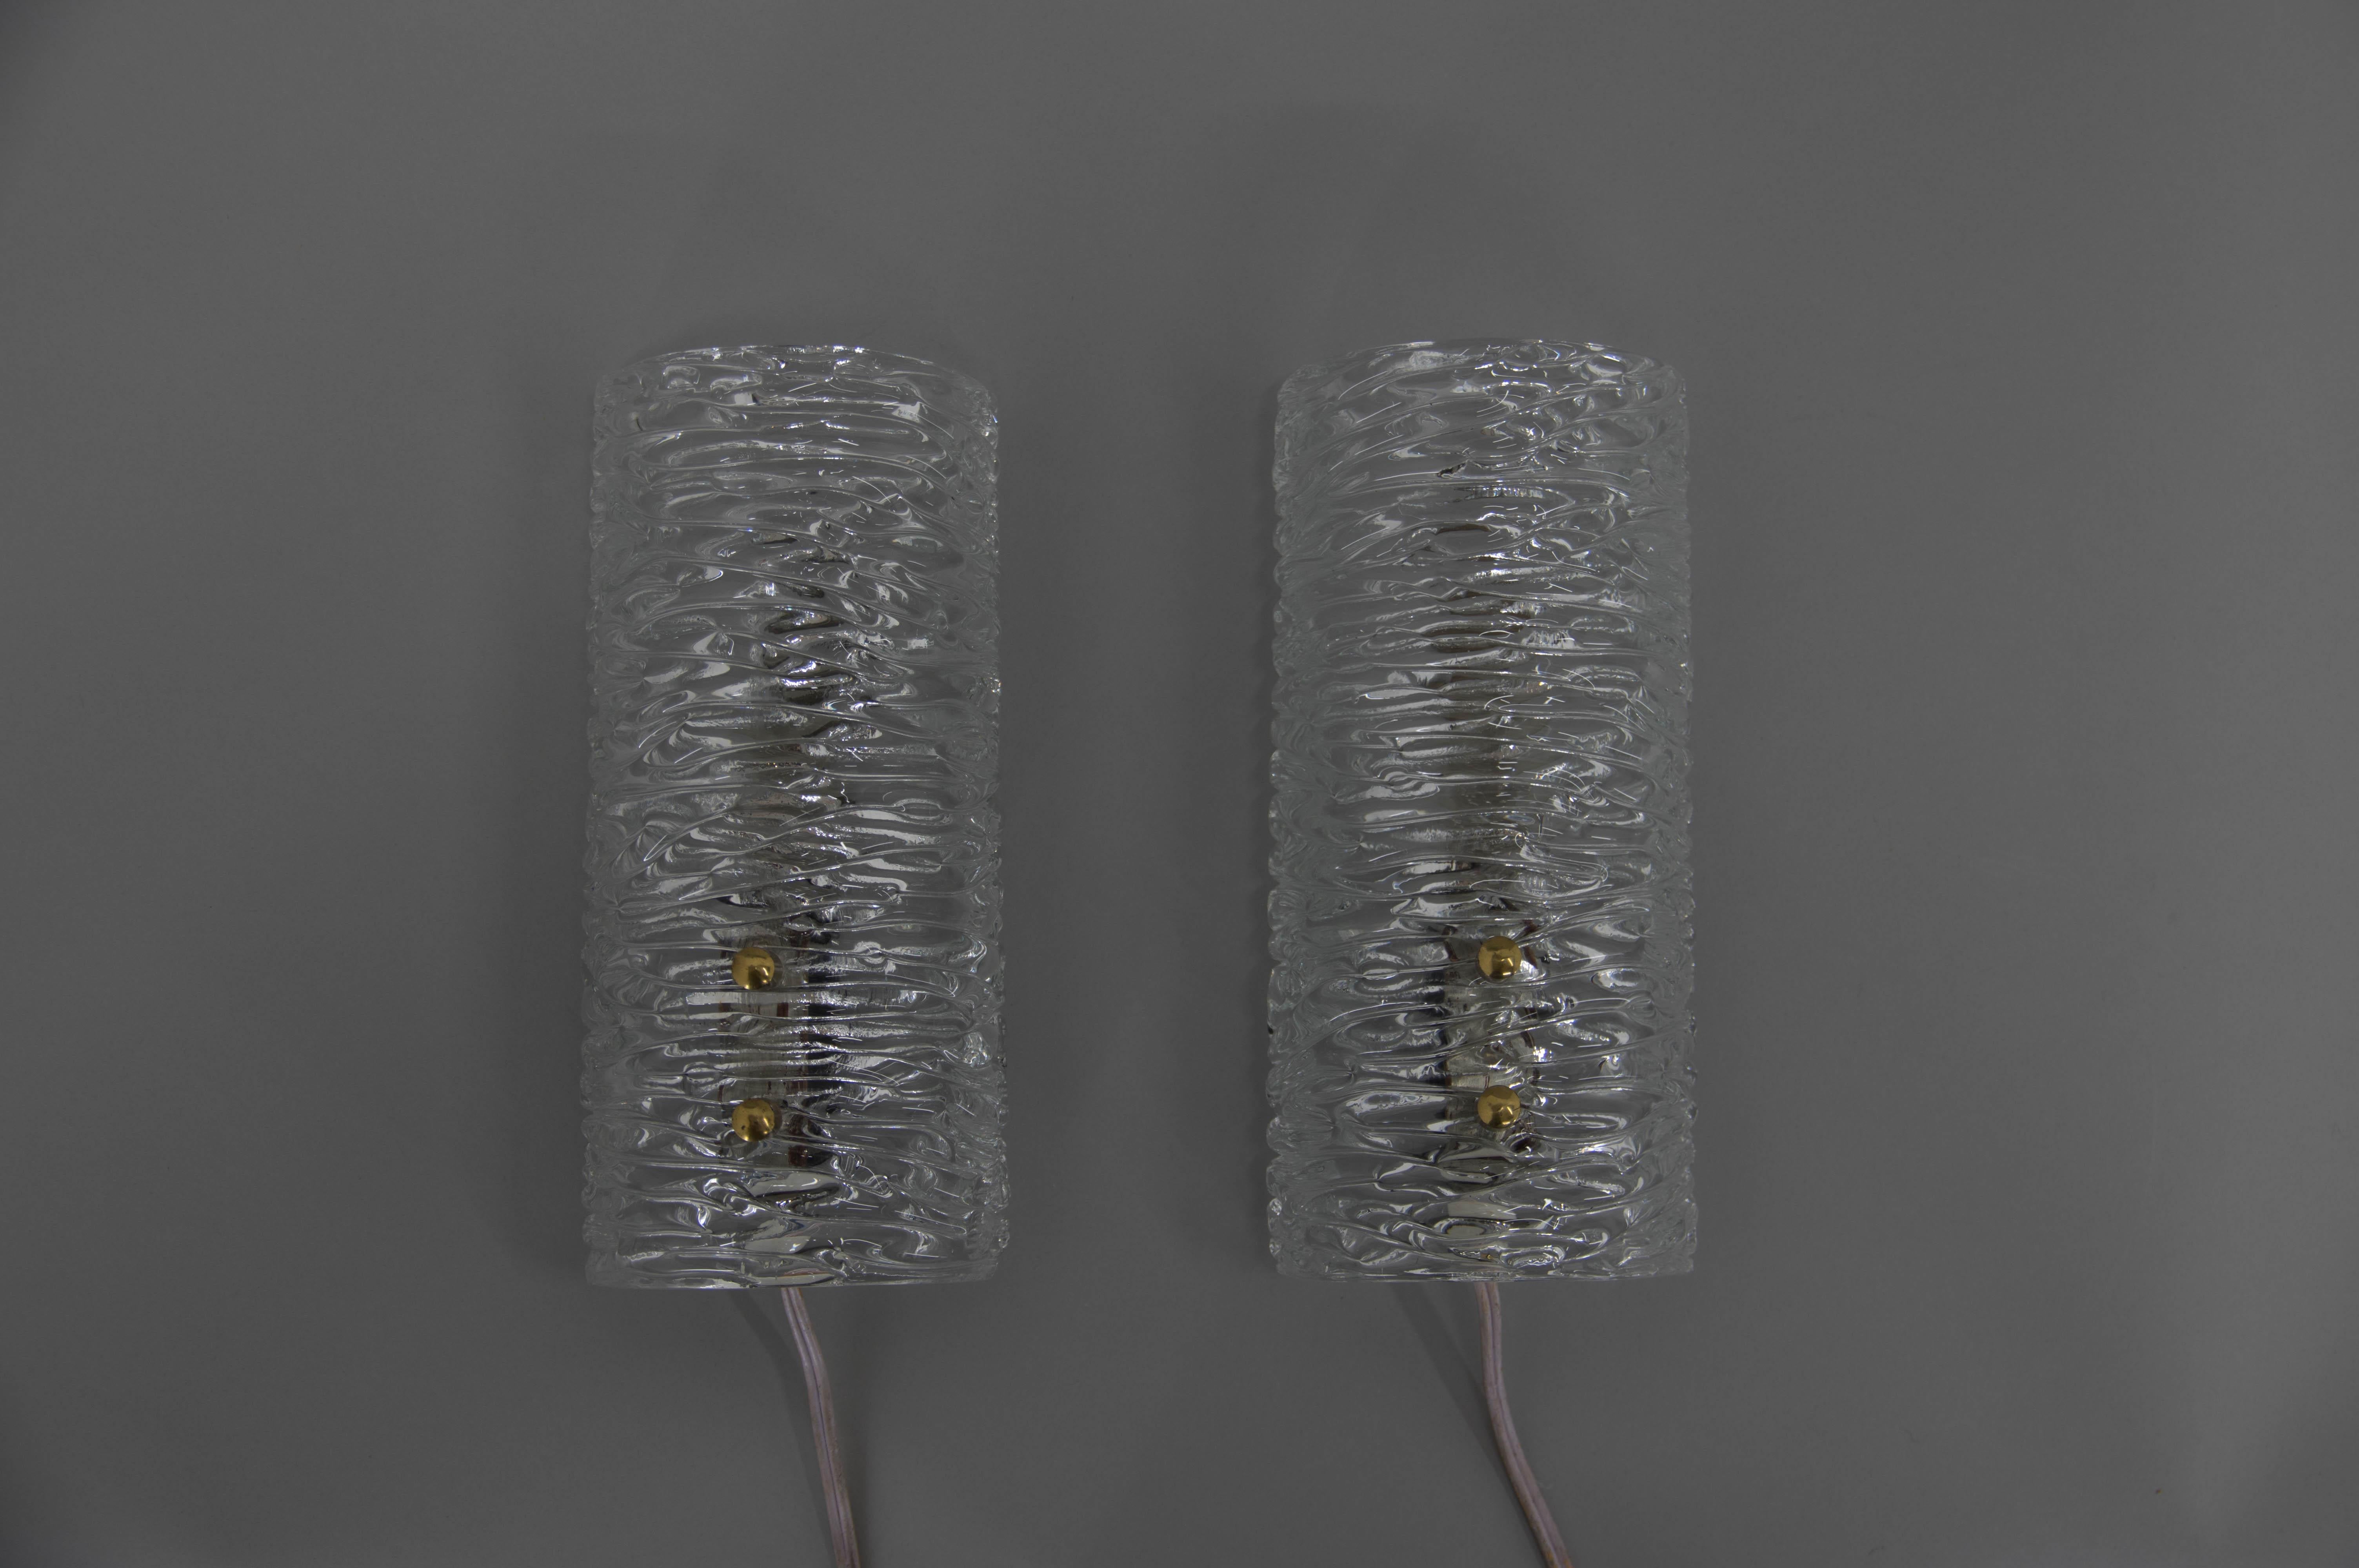 A beautiful pair of brass and glass modernist wall lights, executed by Kalmar Vienna in the 1950s.
Very good condition.
Rewired: 1 x 60W, E12-E14 bulb
US wiring compatible.